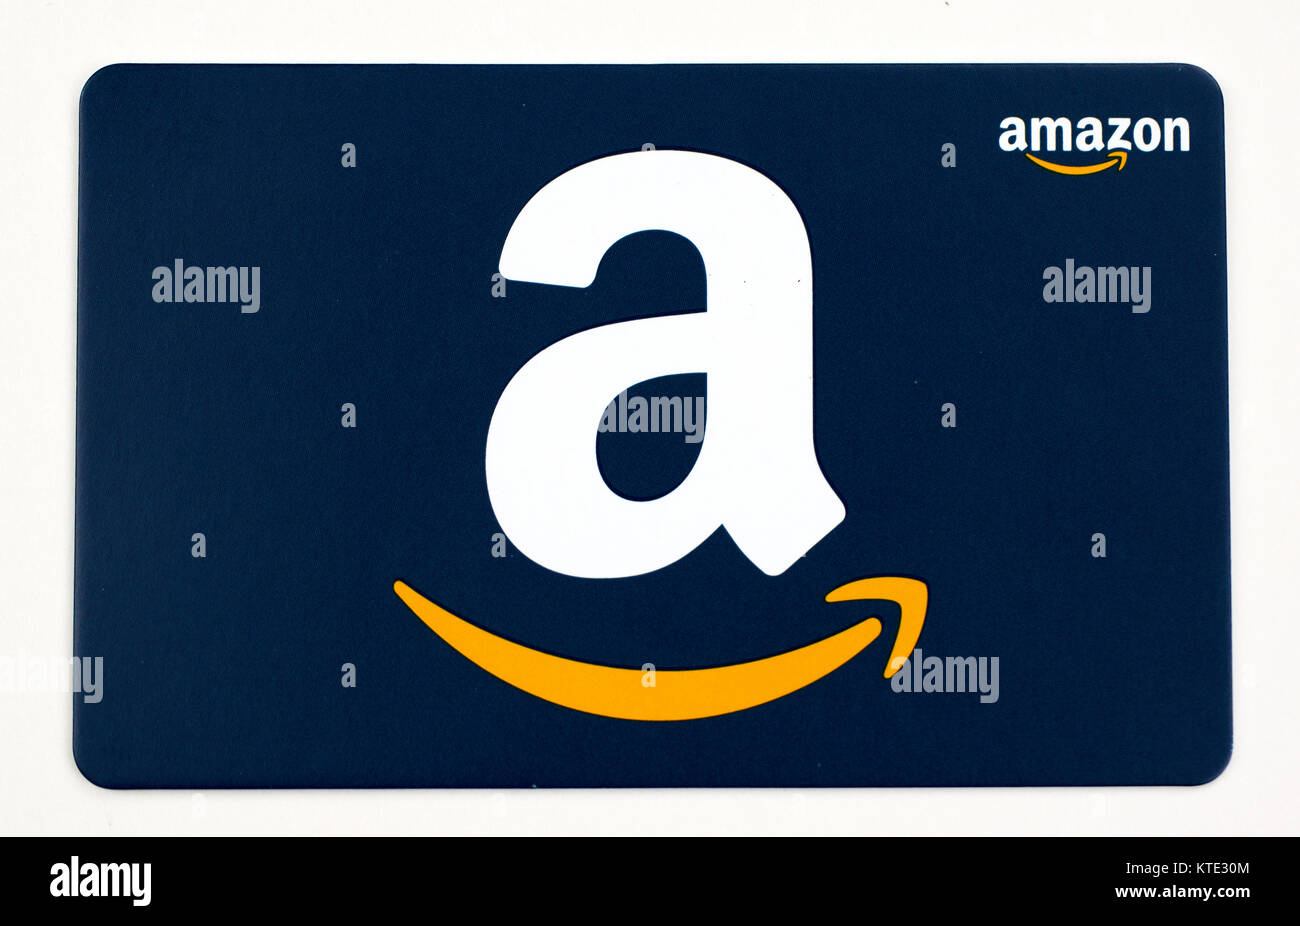 Amazon Gift Card High Resolution Stock Photography and Images - Alamy